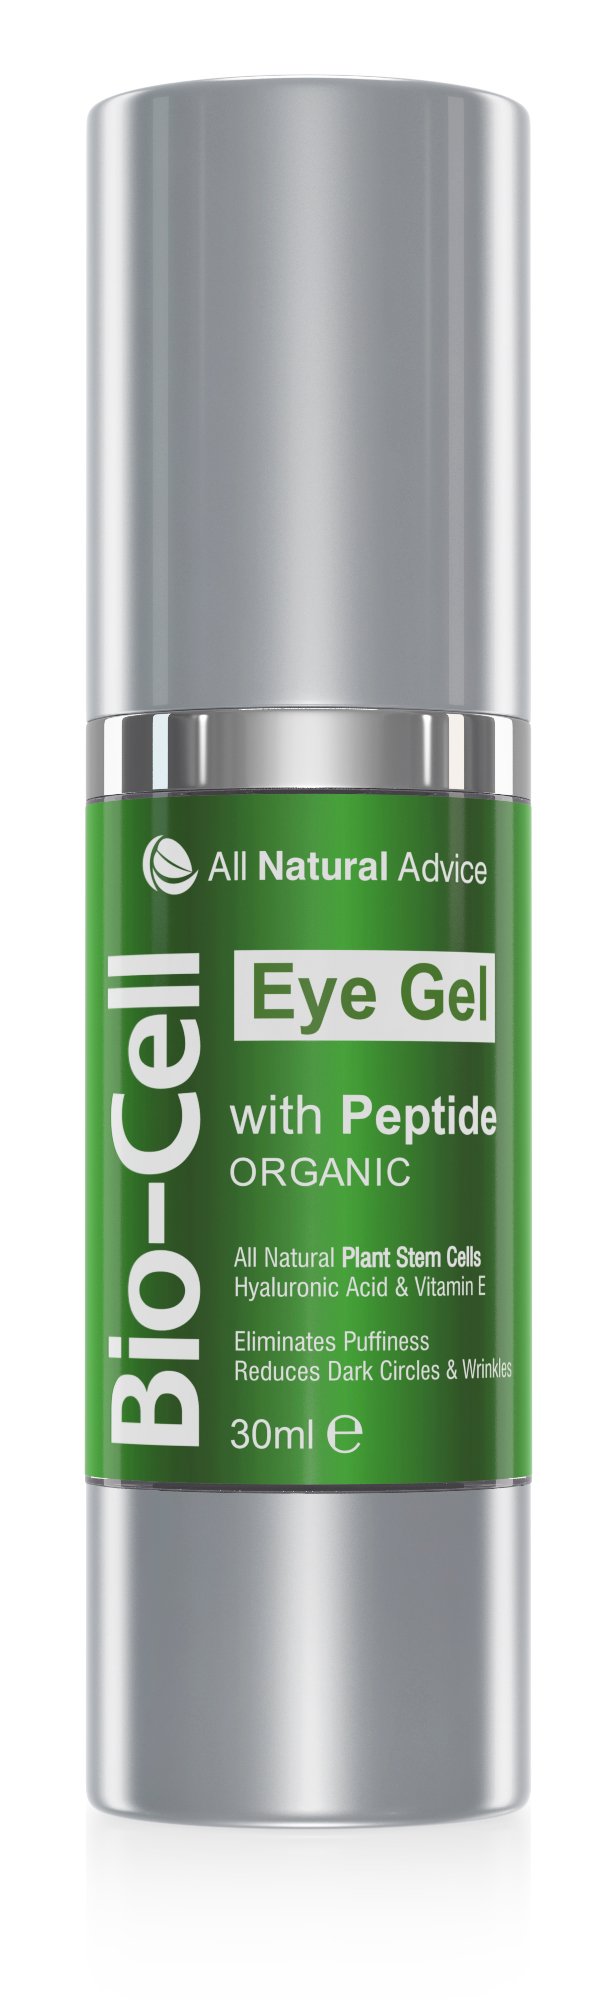 All Natural Advice Bio Cell Eye Gel with Peptide, Hyaluronic Acid and Vitamin E; Reduce the Look of Dark Circles and Wrinkles, Anti Aging Organic Skin Care (30 ml)